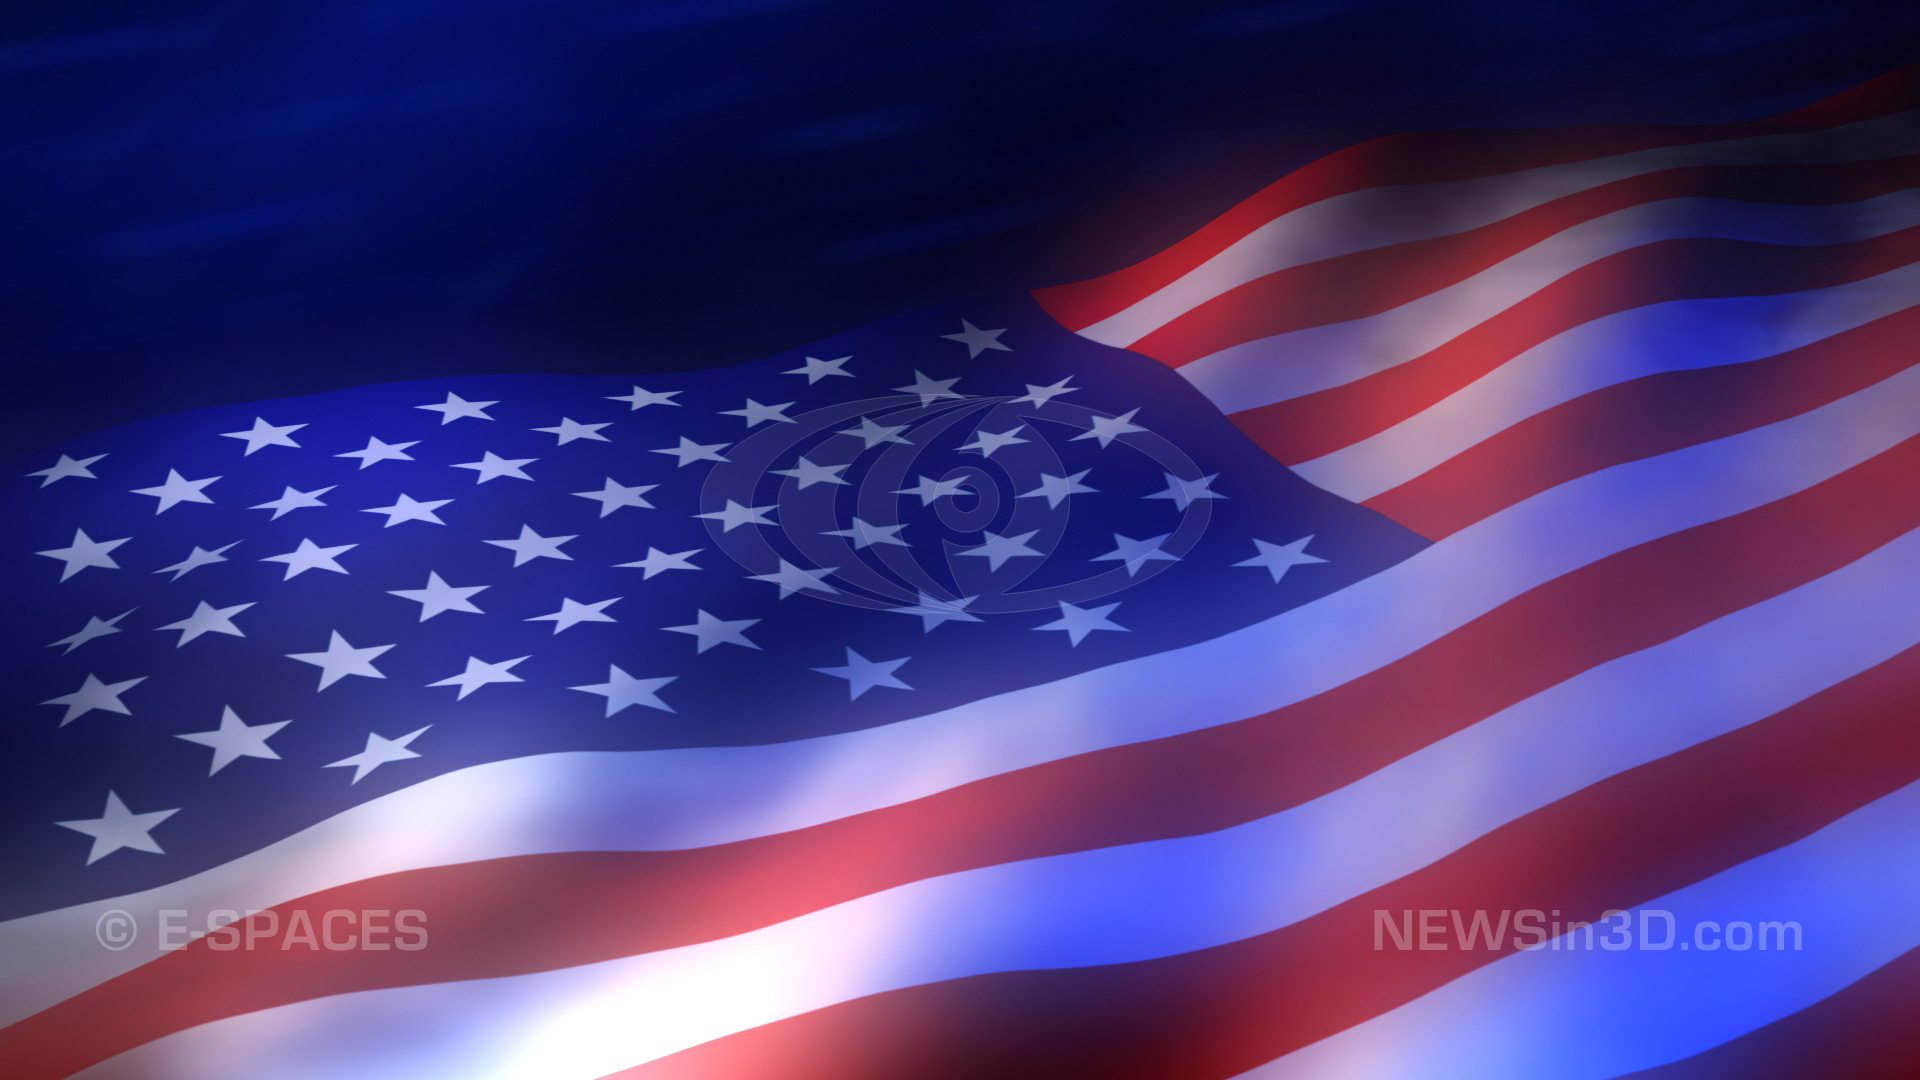 American flag animated background